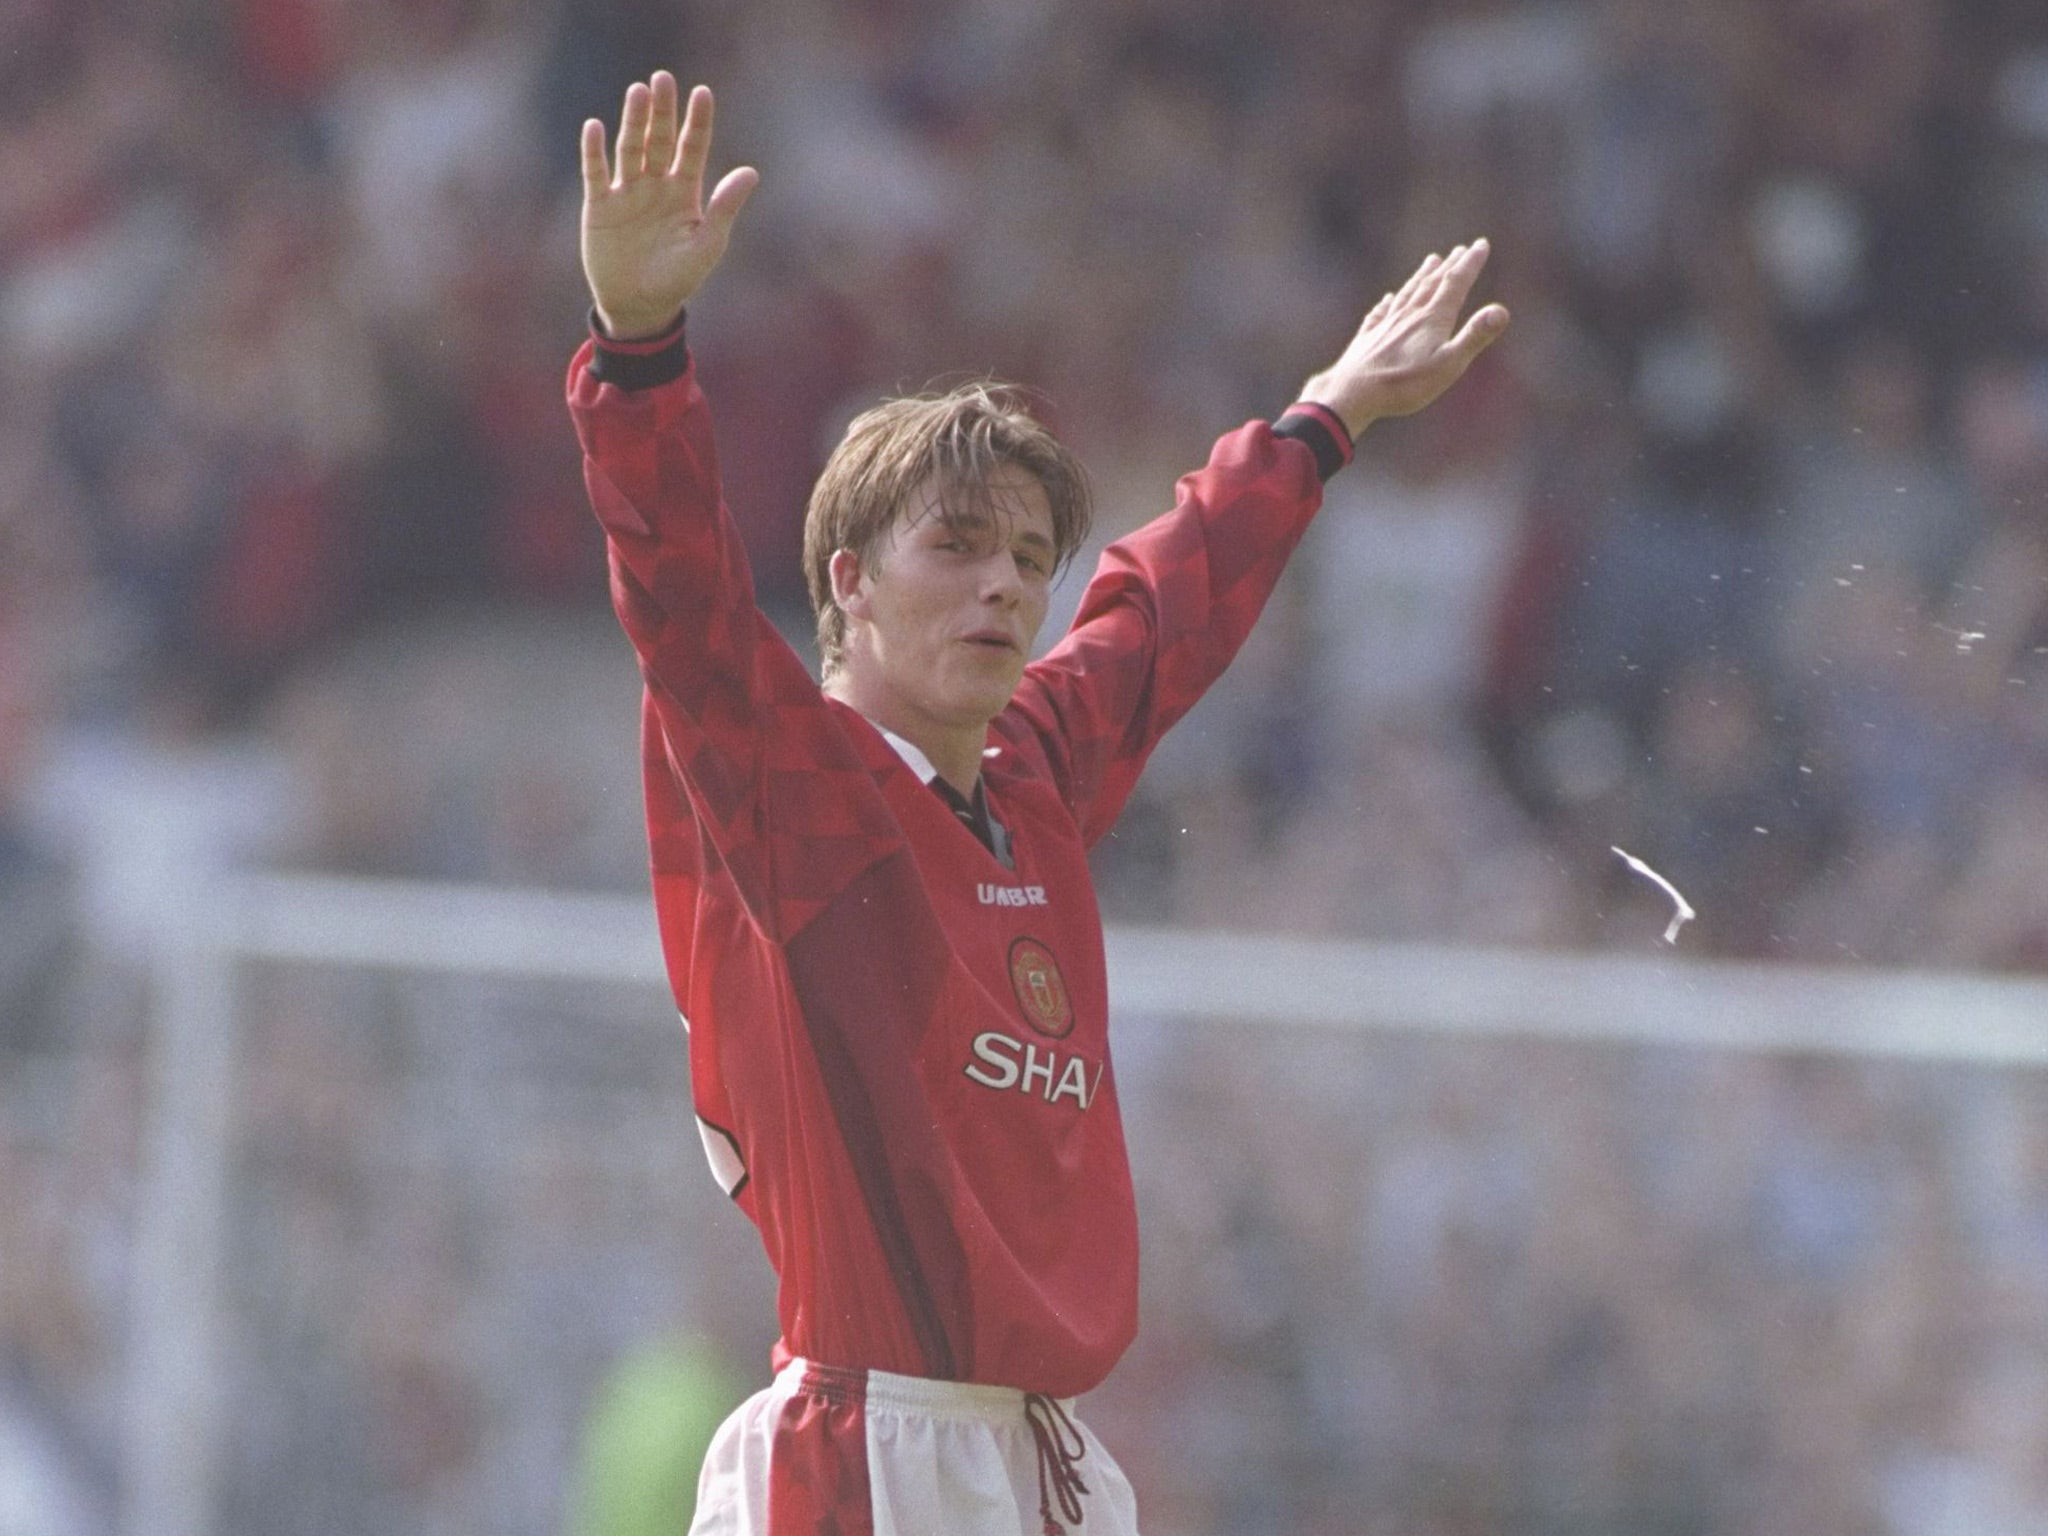 David Beckham celebrates his goal from behind the half-way line against Wimbledon in 1996